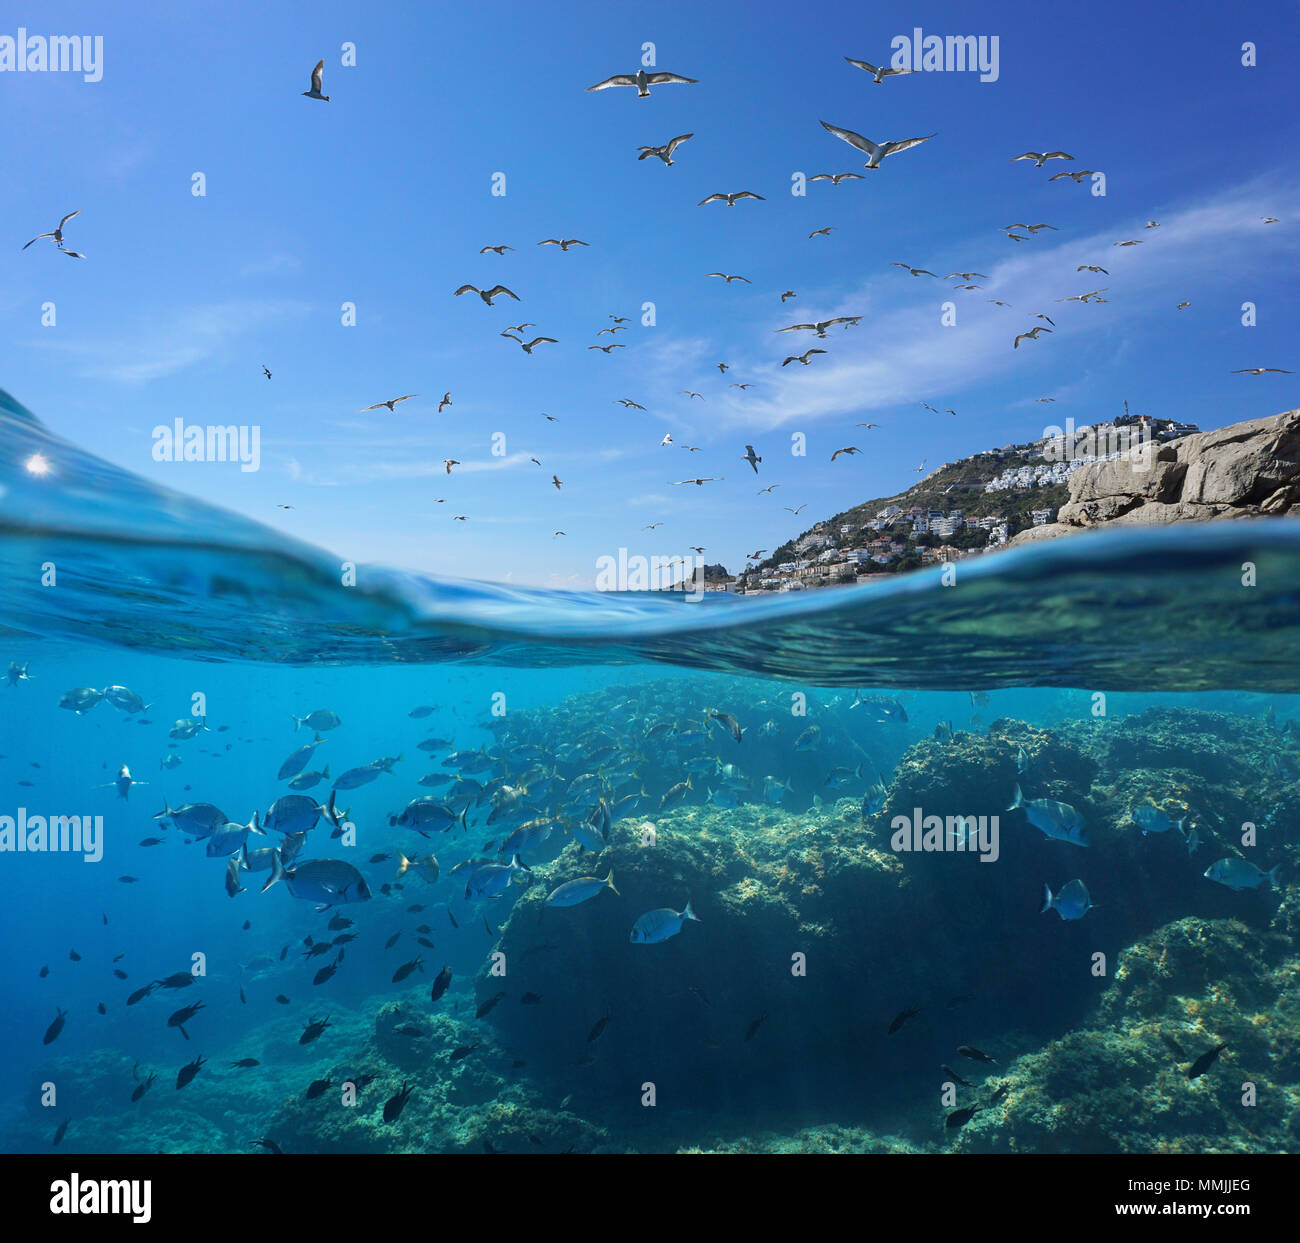 Seabirds flying in the sky and a shoal of fish with rocks underwater, split view above and below water surface, Mediterranean sea, Spain, Costa Brava Stock Photo